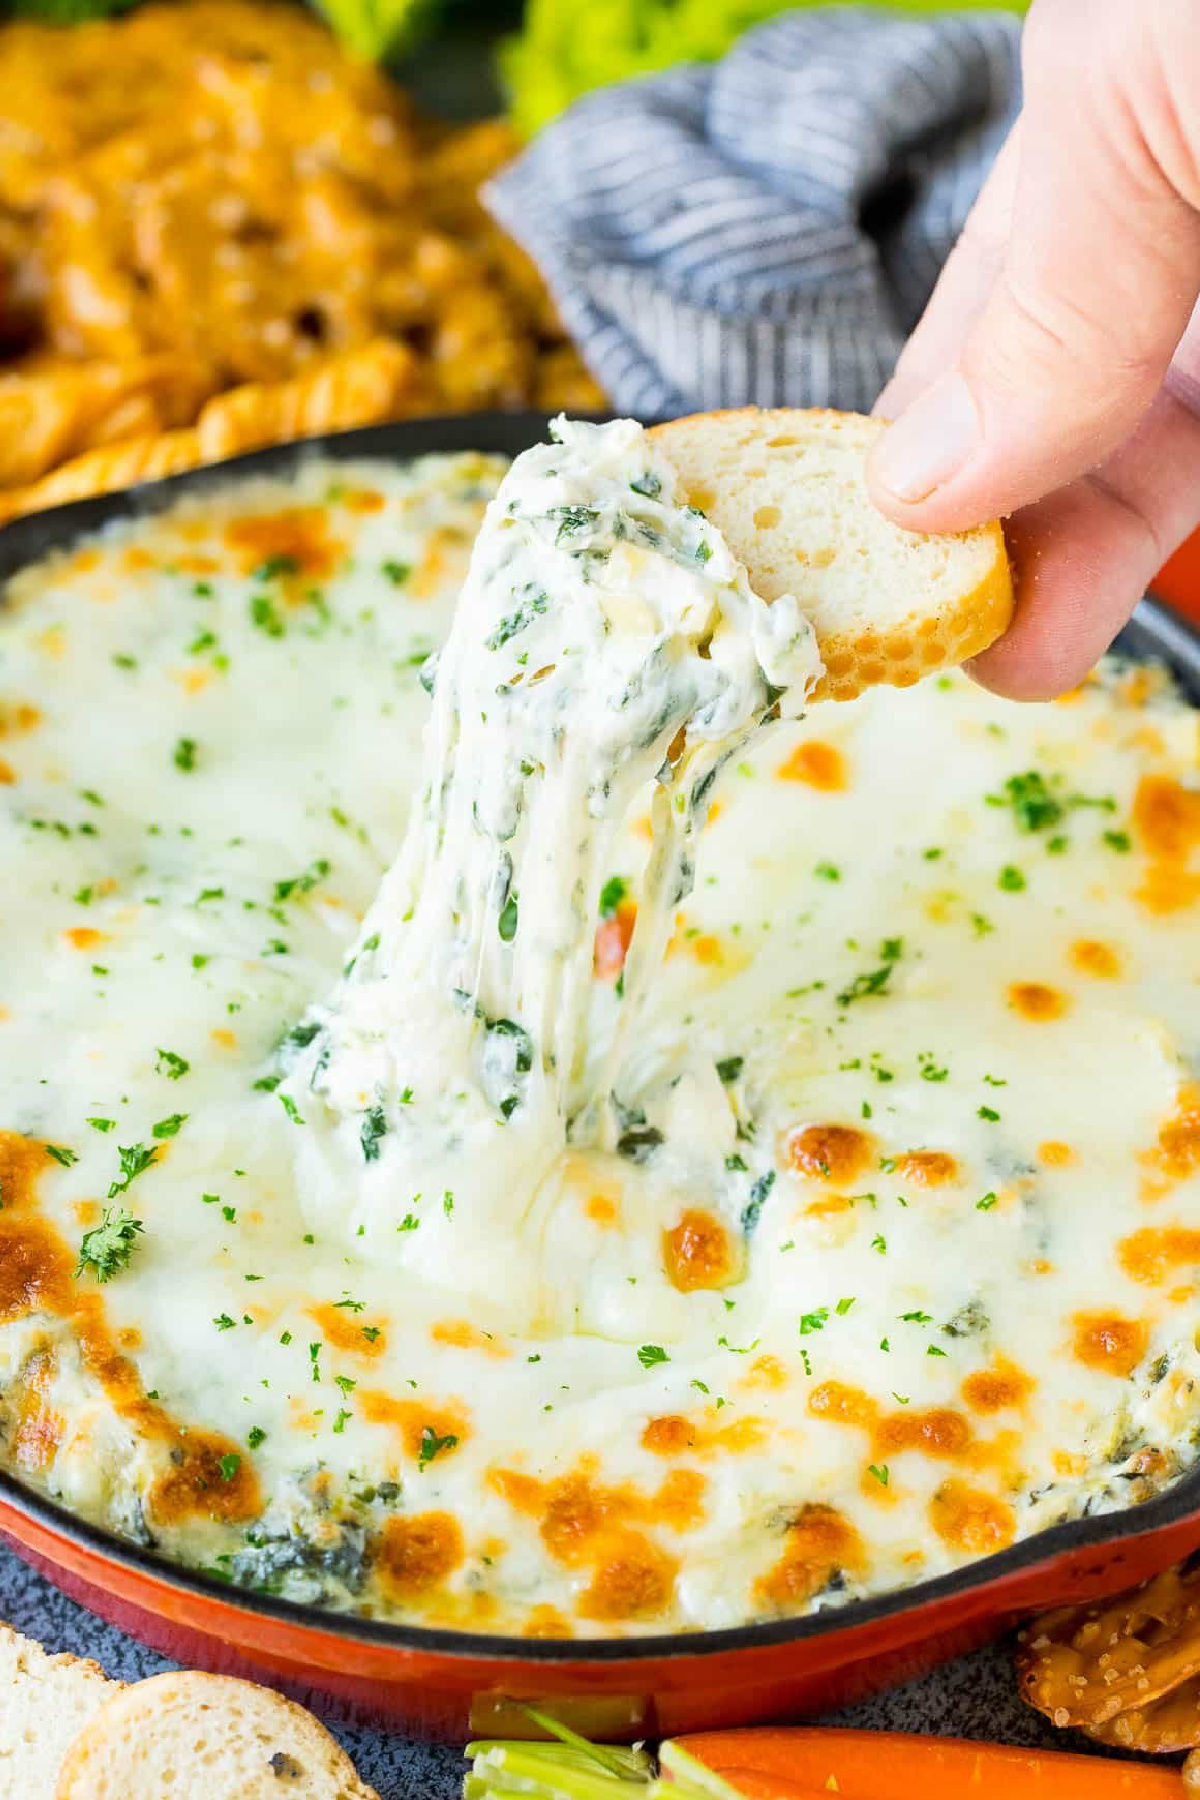 Baked Spinach and Artichoke Dip - a tasty and cheap party food idea